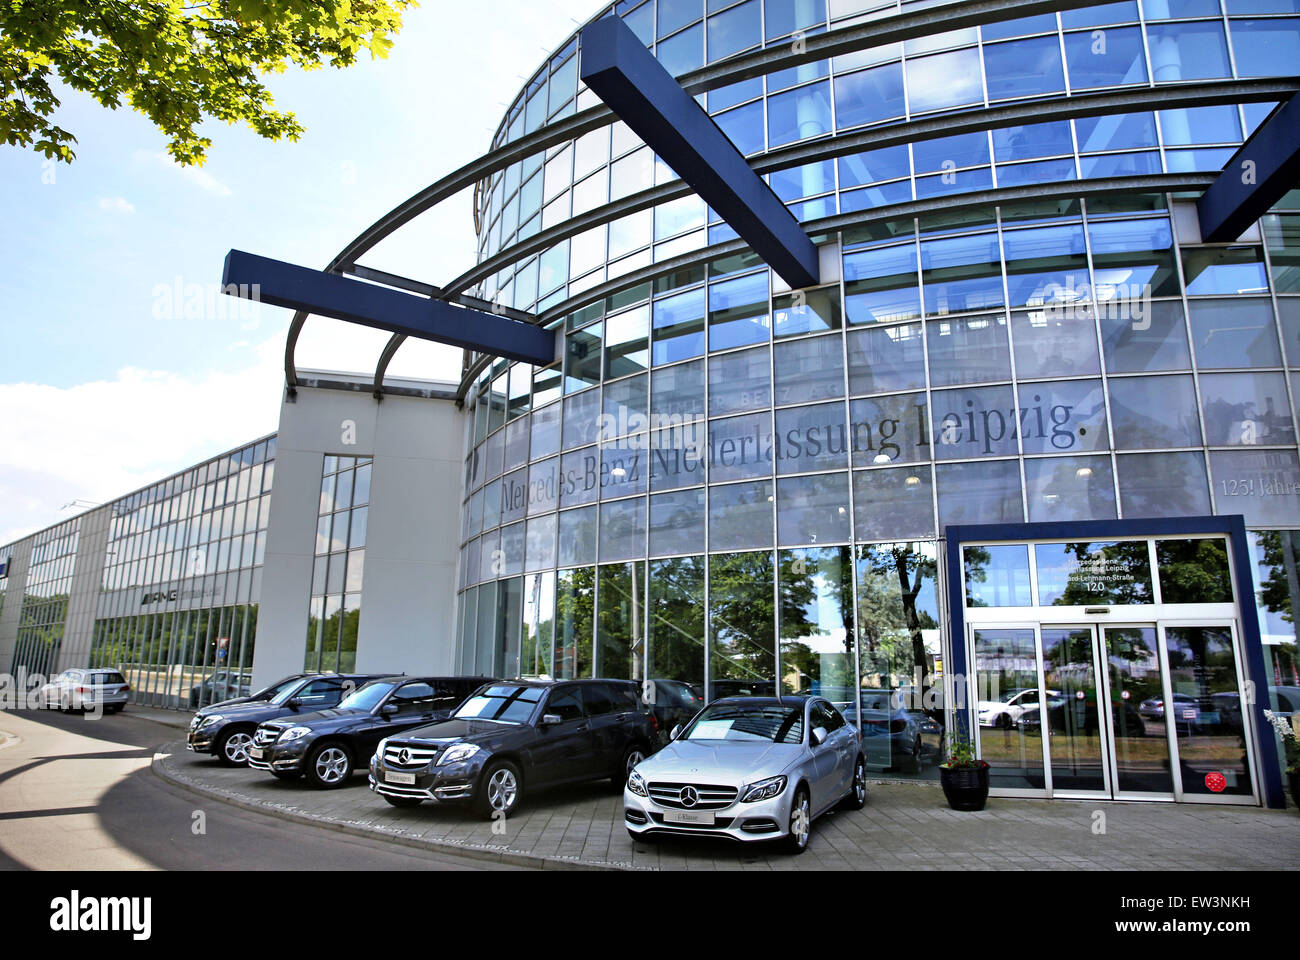 Leipzig, Germany. 17th June, 2015. View of the Mercedes-Benz branch in Leipzig, Germany, 17 June 2015. According to media reports the car manufacturer Daimler wants to sell its Mercedes-Benz branches in East Germany to the Chinese company Lei Shing Hong (LSH). Photo: JAN WOITAS/dpa/Alamy Live News Stock Photo